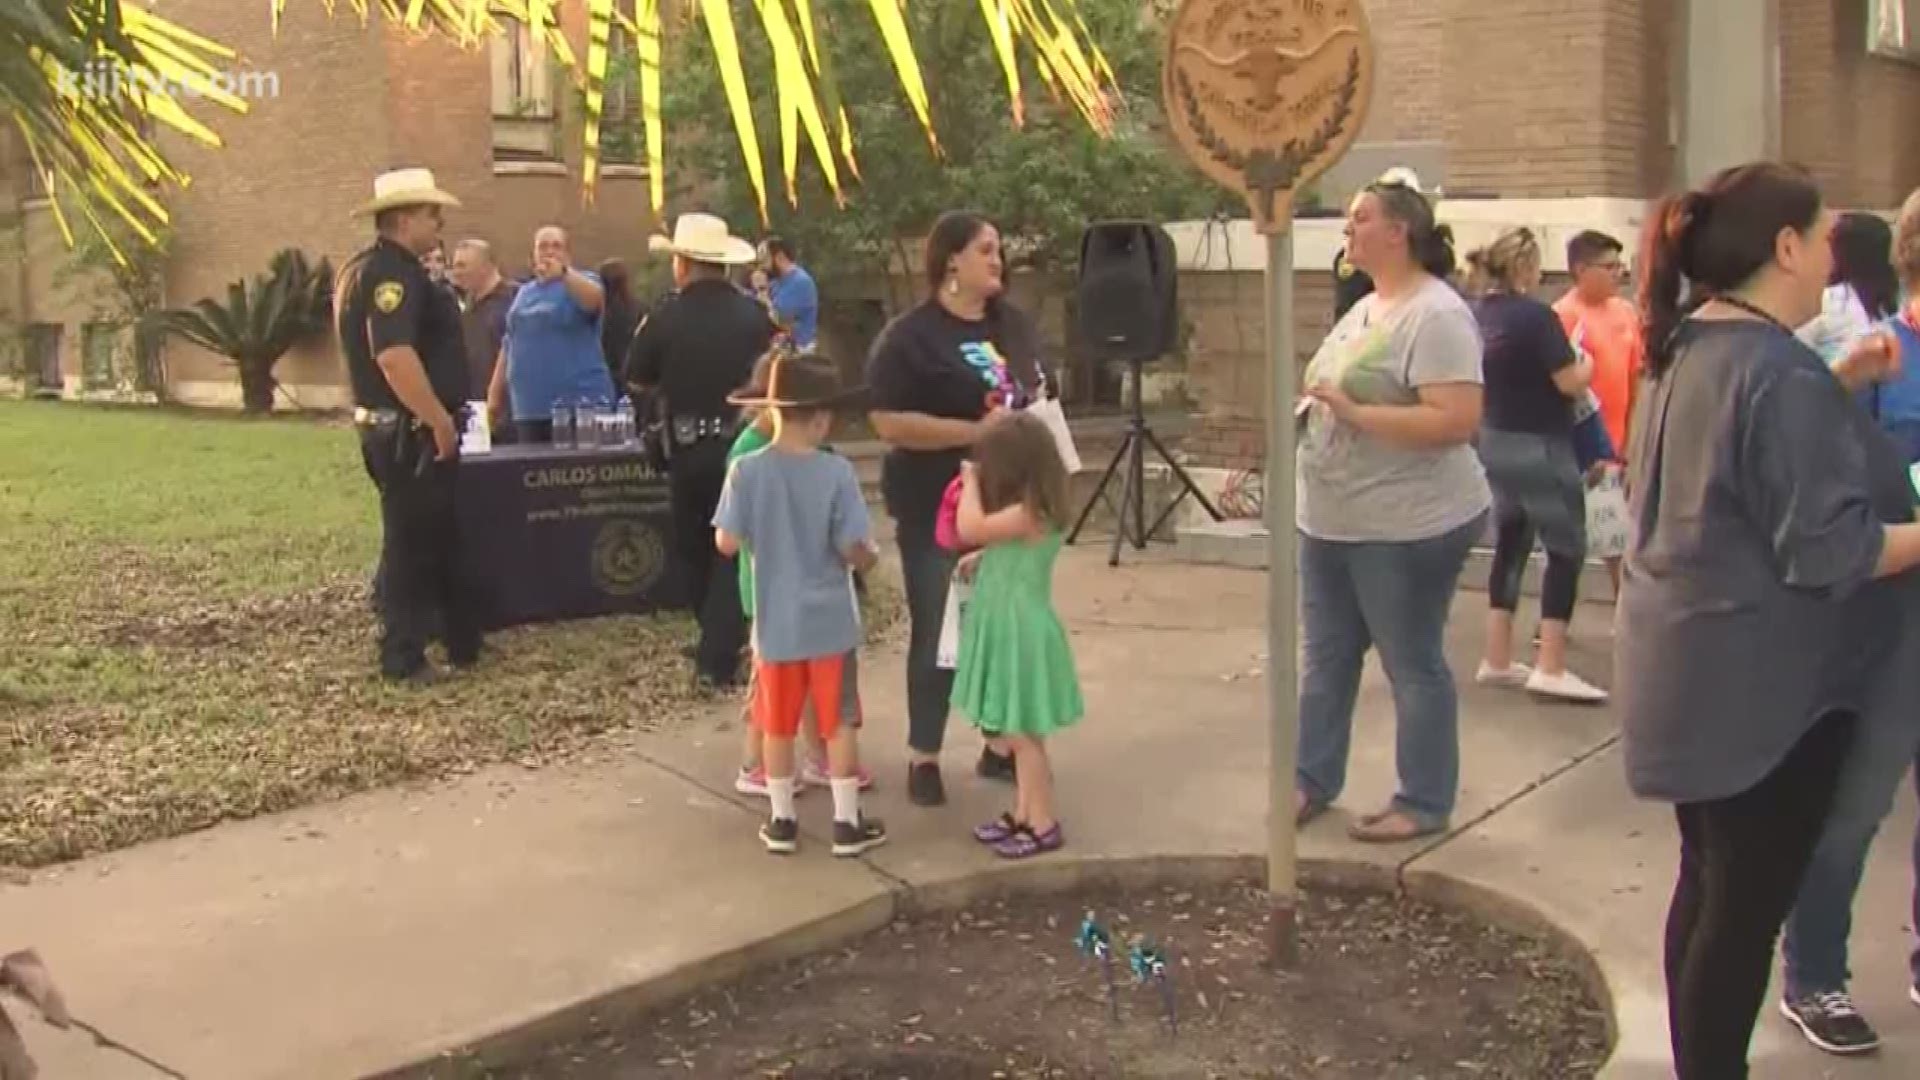 Officials with Child Protective Services and CASA gathered Tuesday night for a special candlelight vigil in Alice to pay tribute to the victims of child abuse.